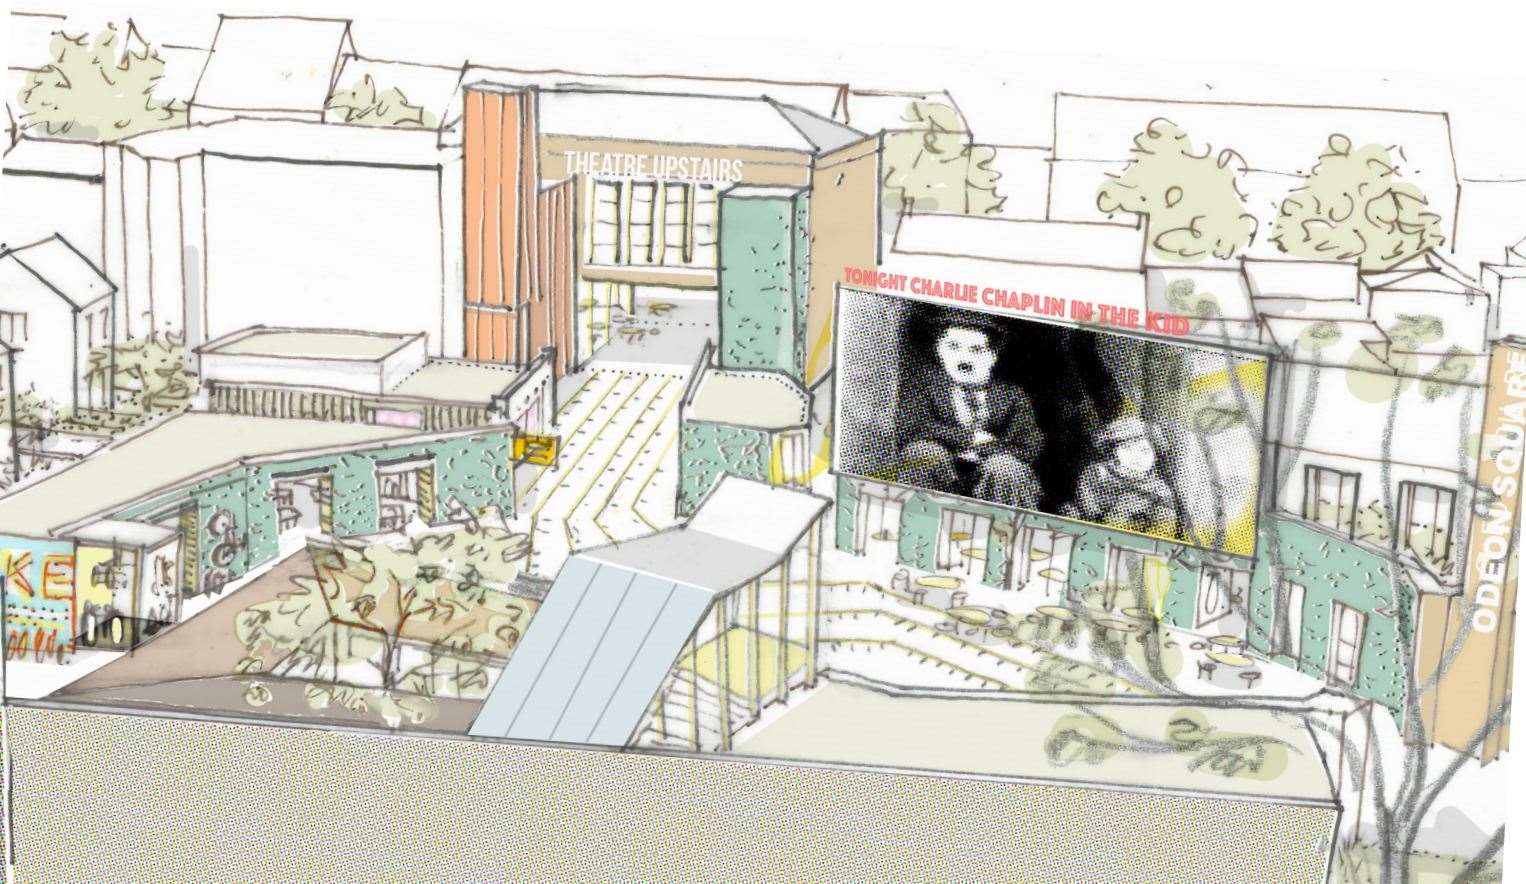 An artist's impression of the site, showing the rear of the former Mecca Bingo